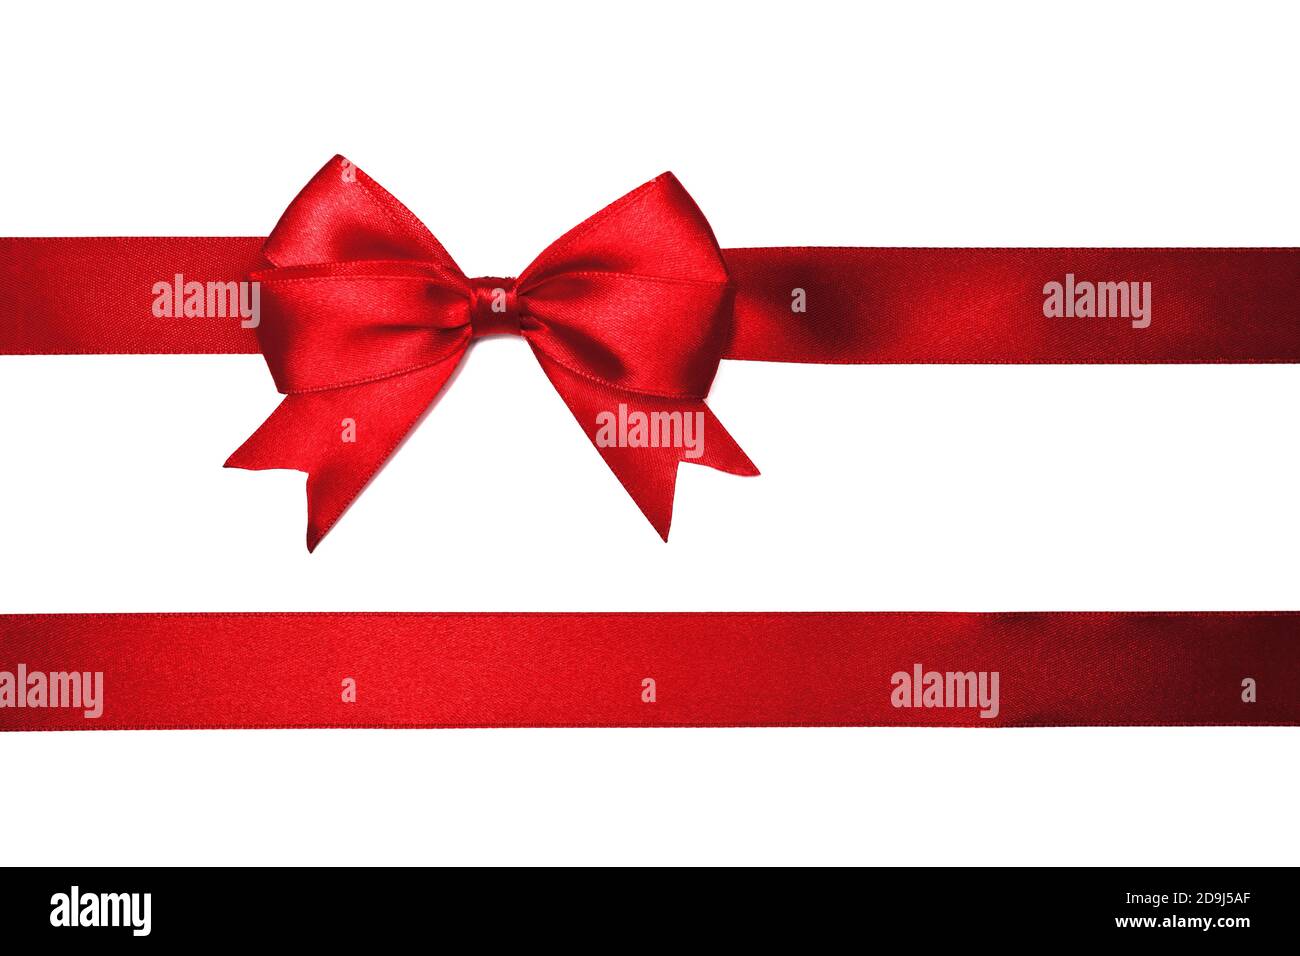 Red satin bow isolated on white background Stock Photo